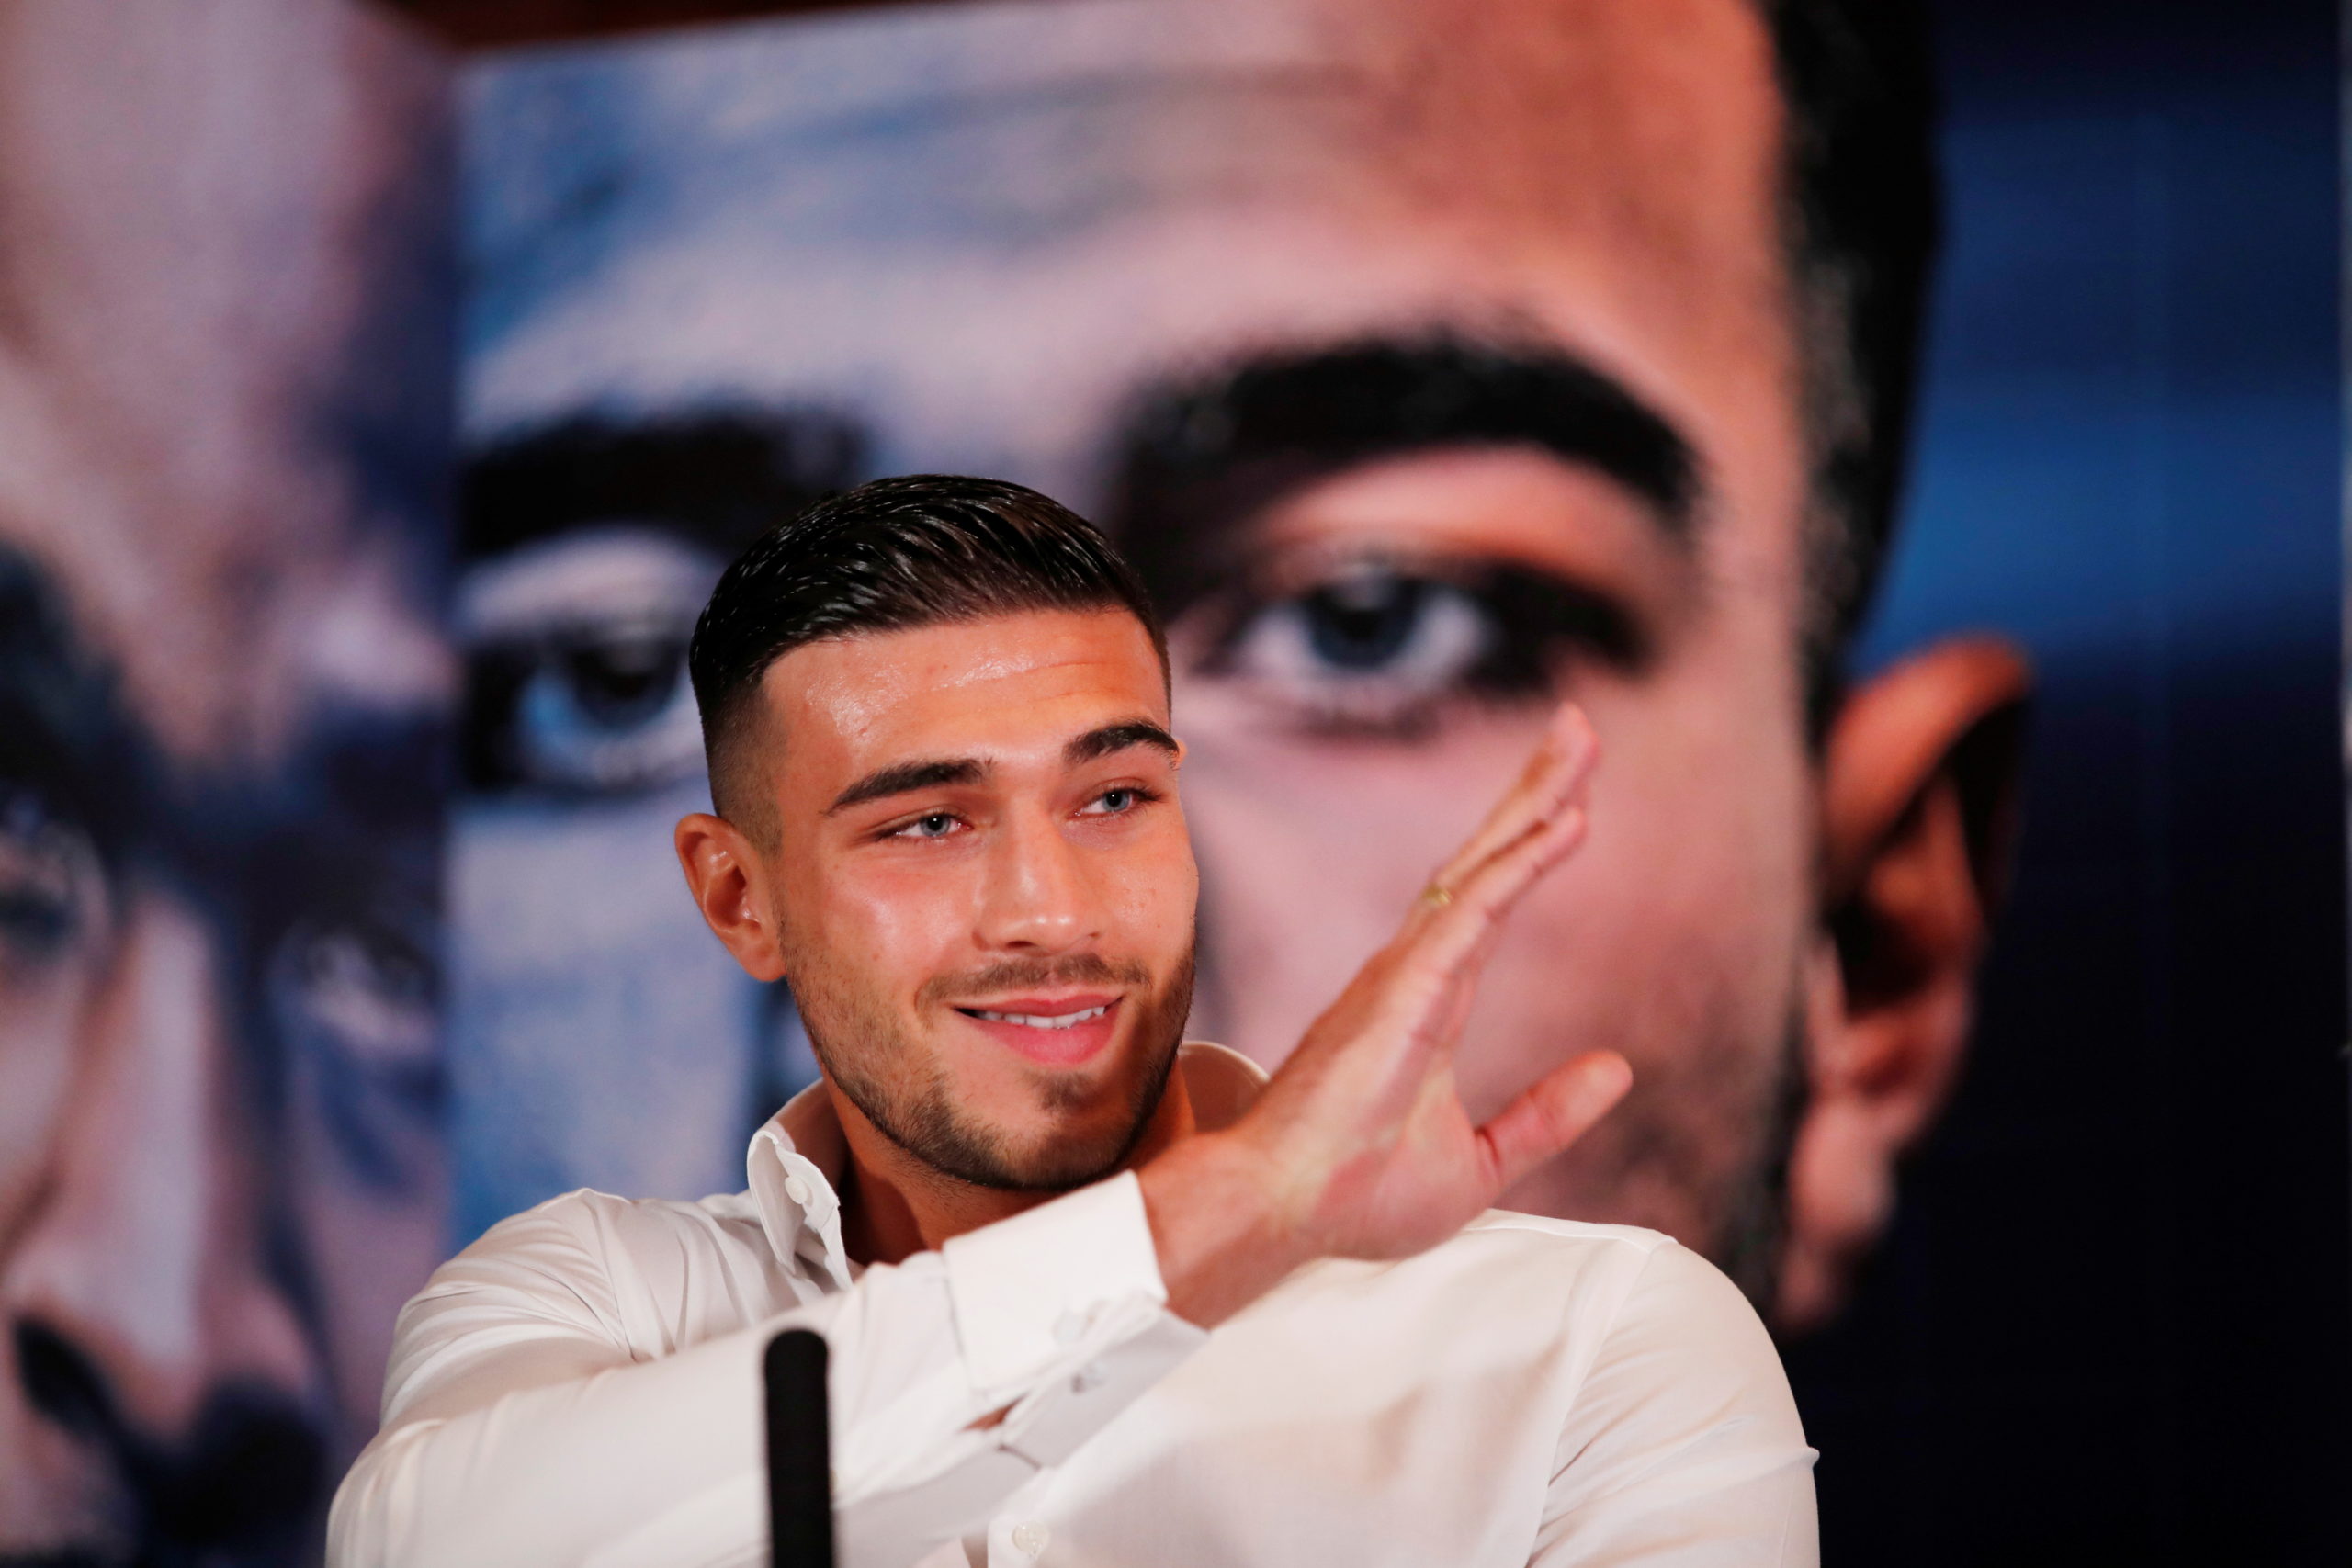 FILE PHOTO: Boxing - Queensberry Promotions Press Conference - The Landmark hotel, London, Britain - August 3, 2021  Tommy Fury during the press conference